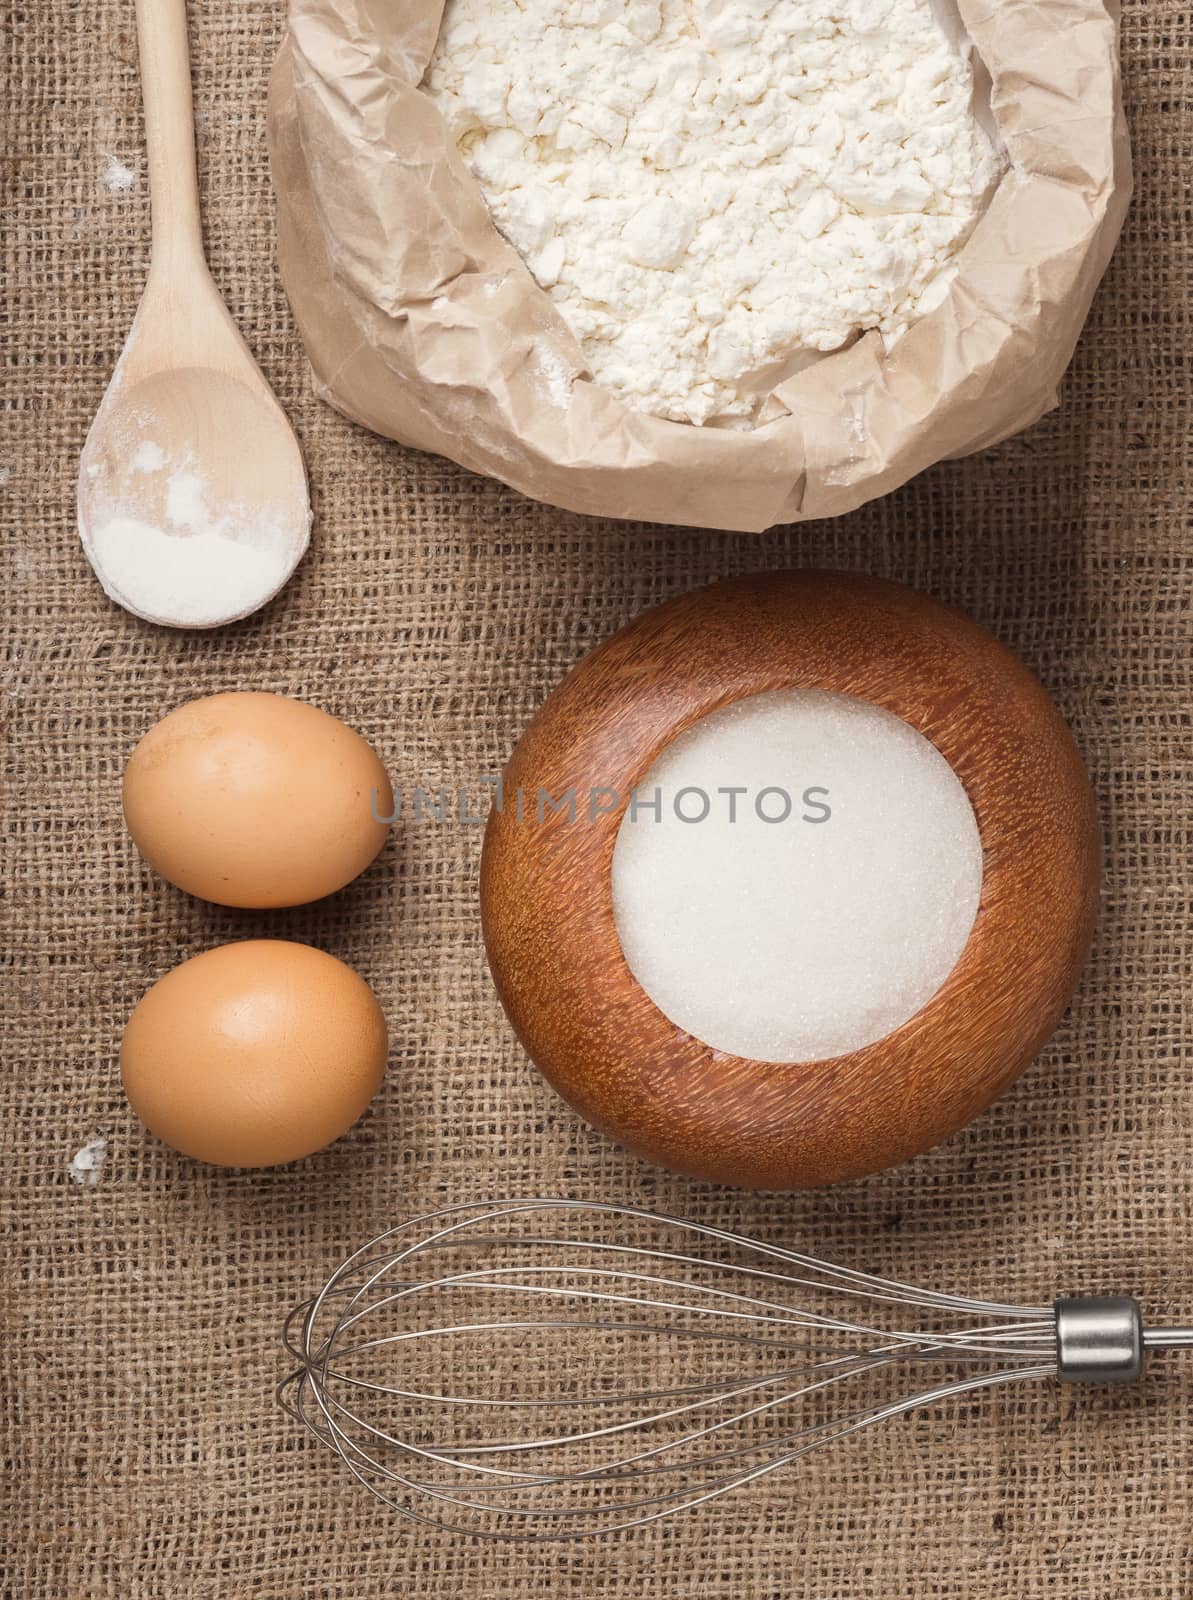 The ingredients for homemade baking sponge cake, a wheat flour in a paper bag, two eggs, sugar in a wooden bowl, whisk and a wooden spoon on sackcloth, top view